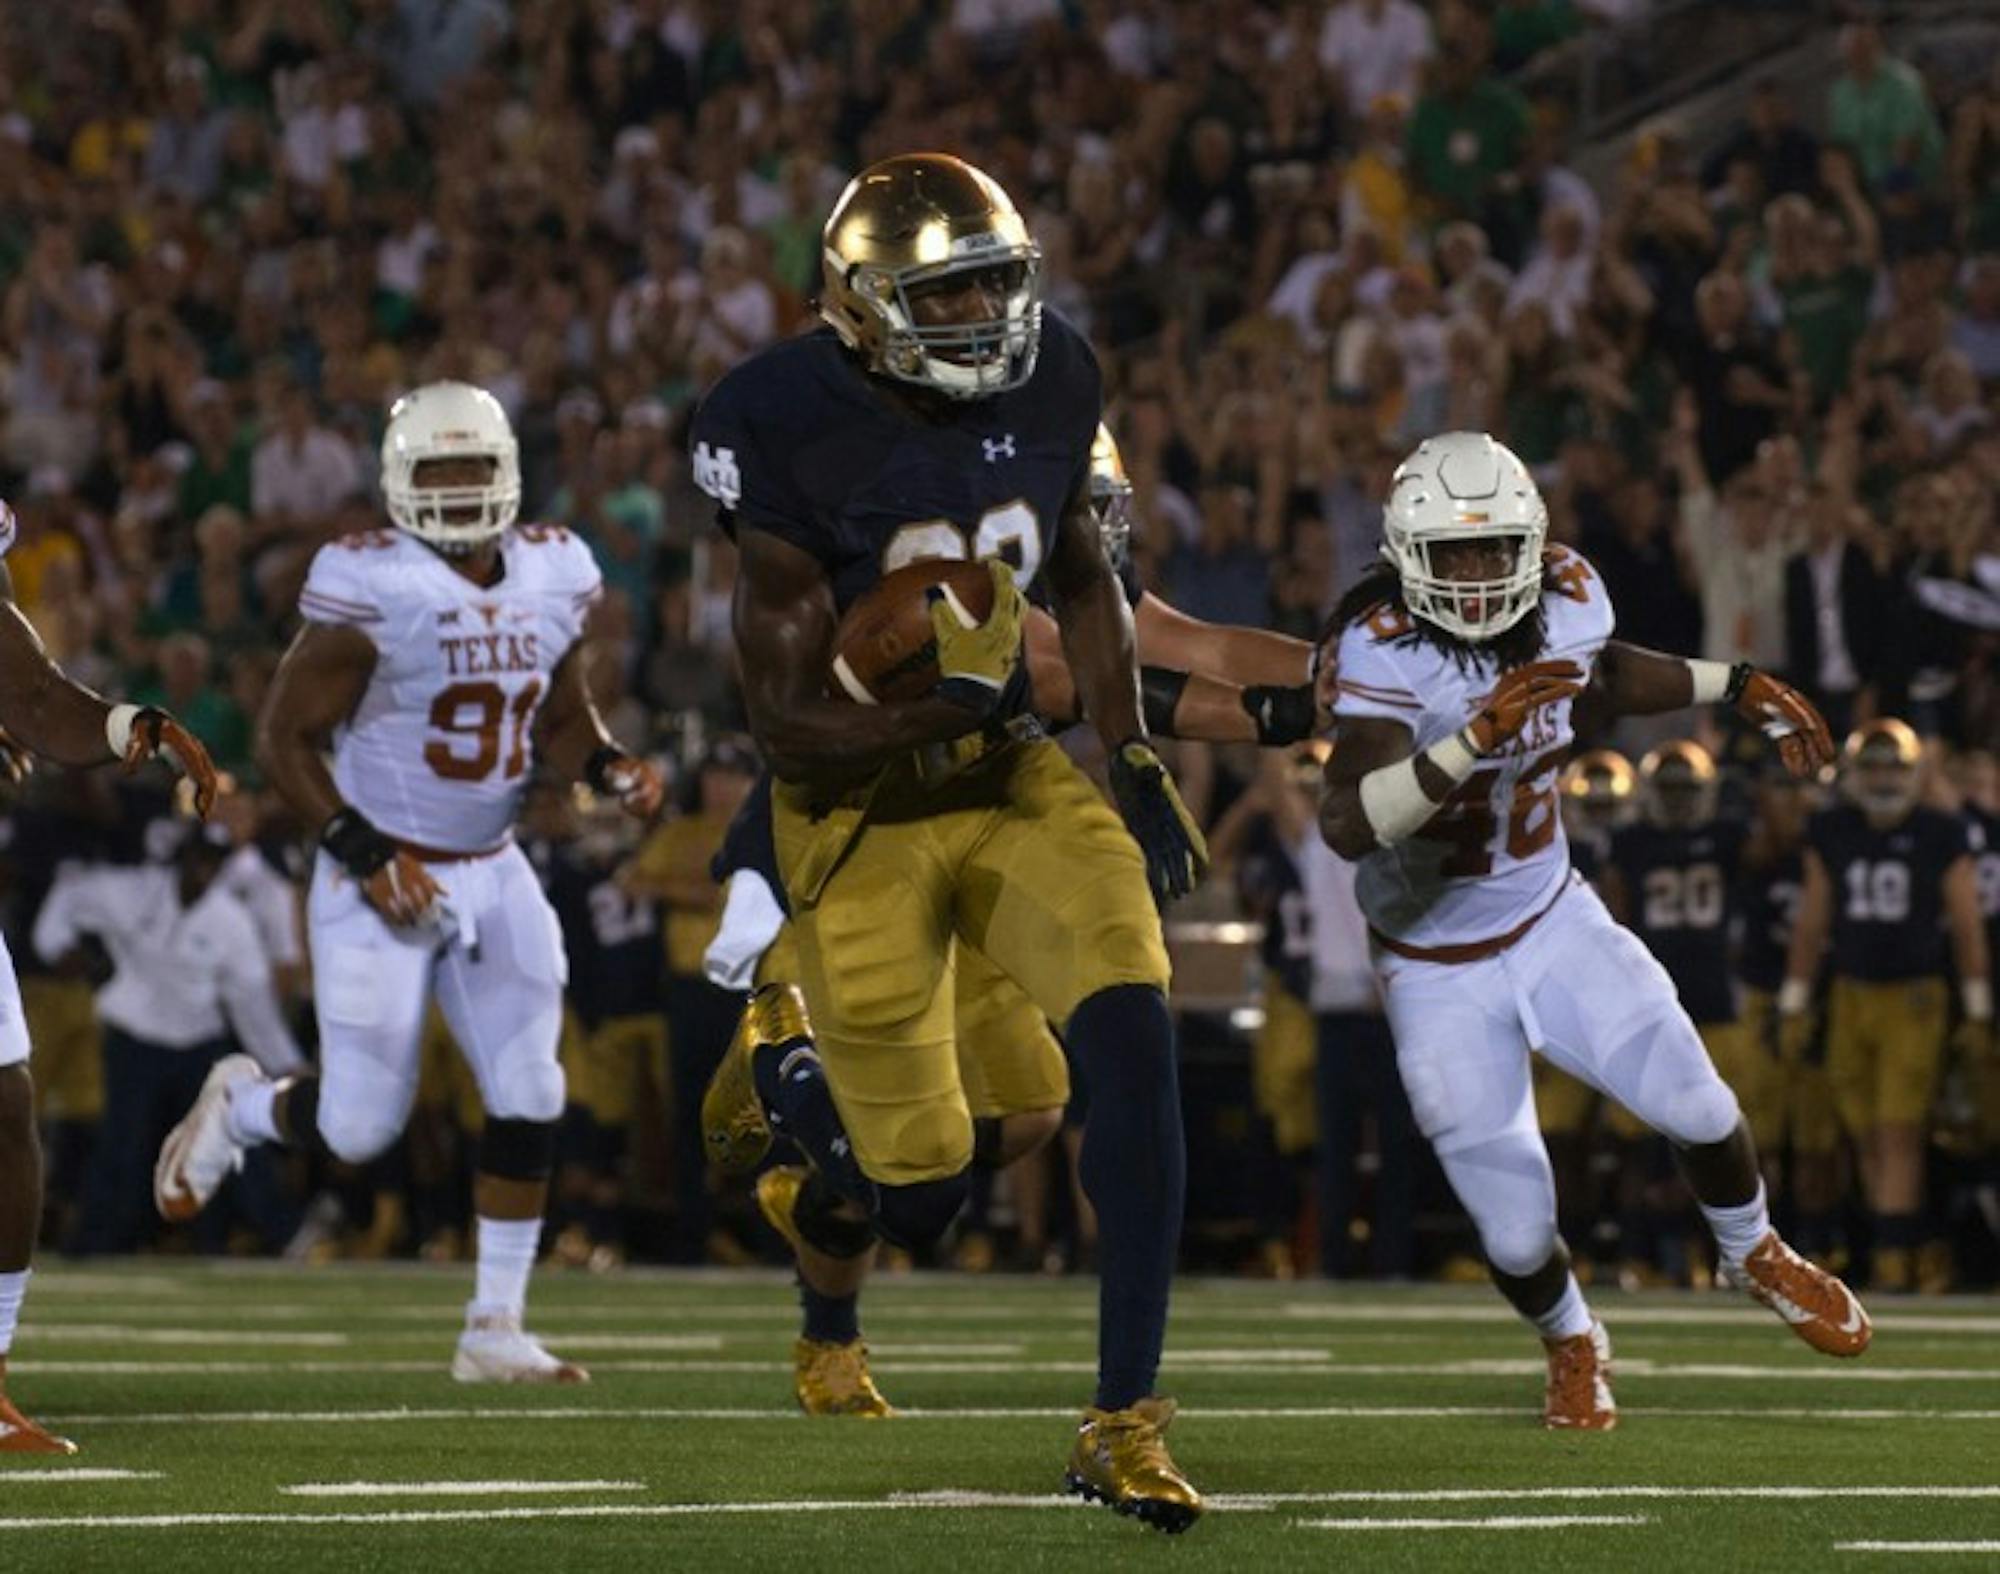 Freshman running back Josh Adams carries the ball during Notre Dame’s 38-3 victory over Texas on Sept. 5 at Notre Dame Stadium.